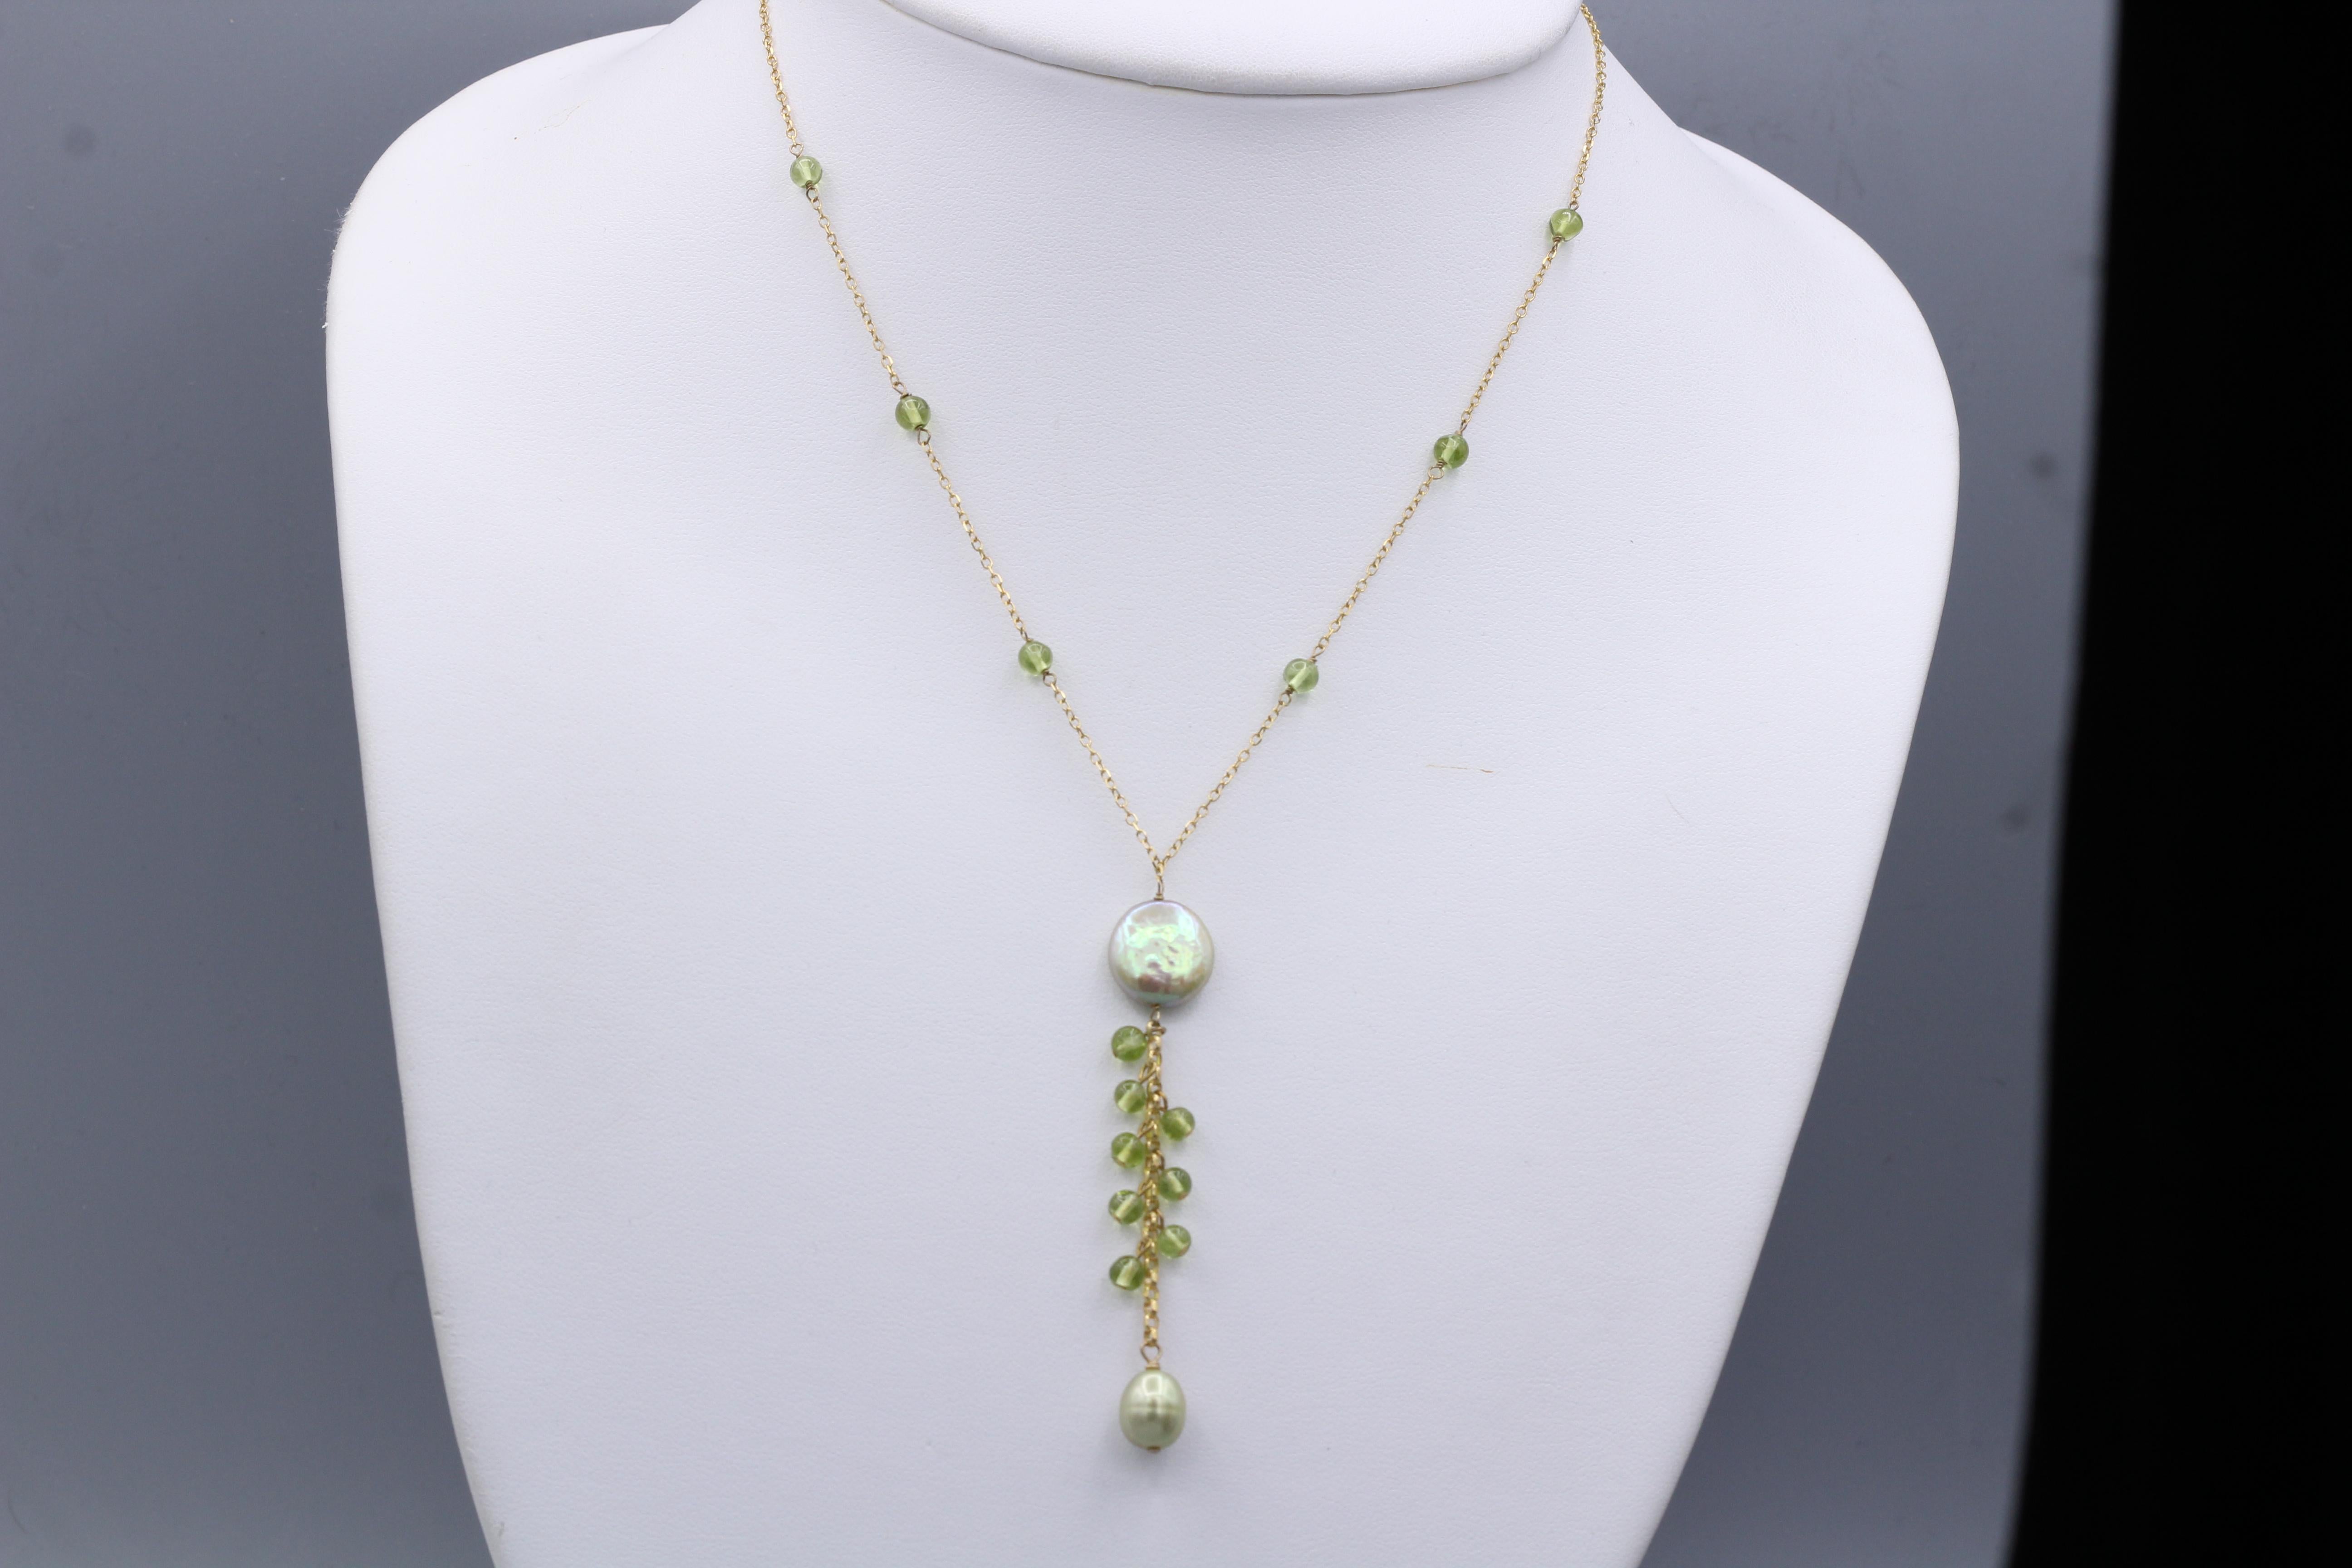 Elegant Peridot & Pearl Dangle Necklace Wire Style
14k yellow gold
Length 16.5’ Inch
Dangle Length approx. 2.5’ Inch
Natural Peridot Beads.
Fresh Water – Green Tone Enhanced Pearls
Total Weight 5.5 grams
Spring ring Lock
